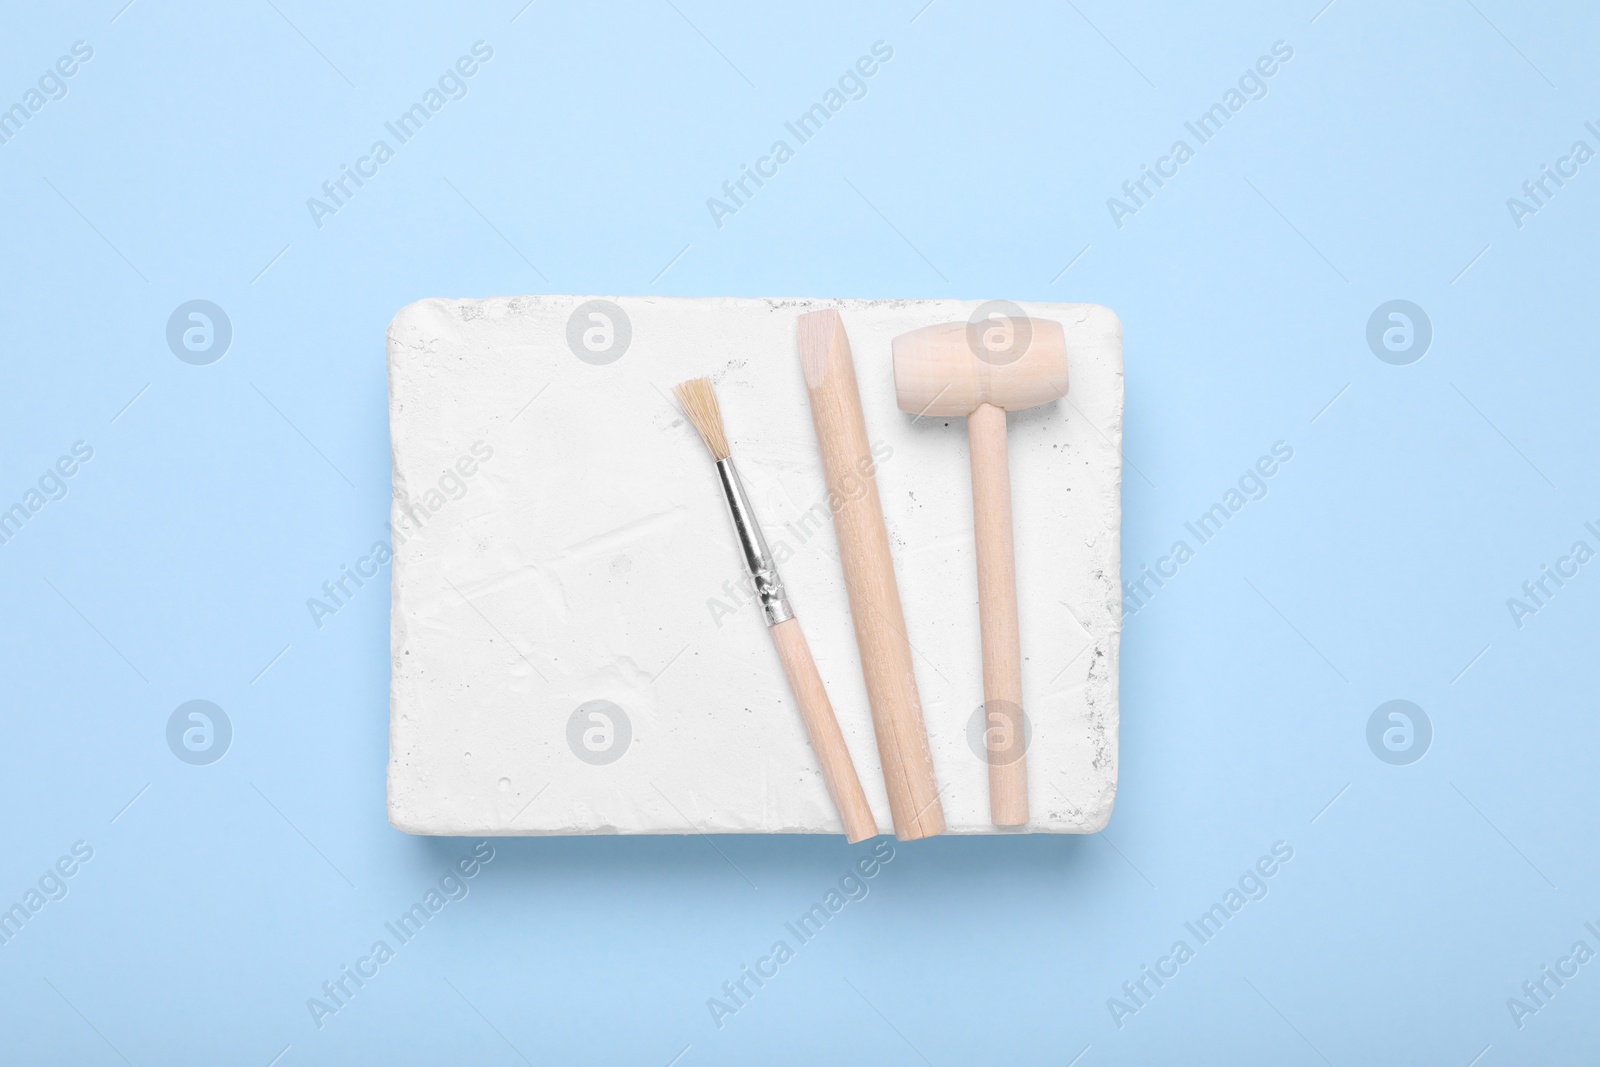 Photo of Educational toy for motor skills development. Excavation kit (plaster, digging tools and brush) on light blue background, top view